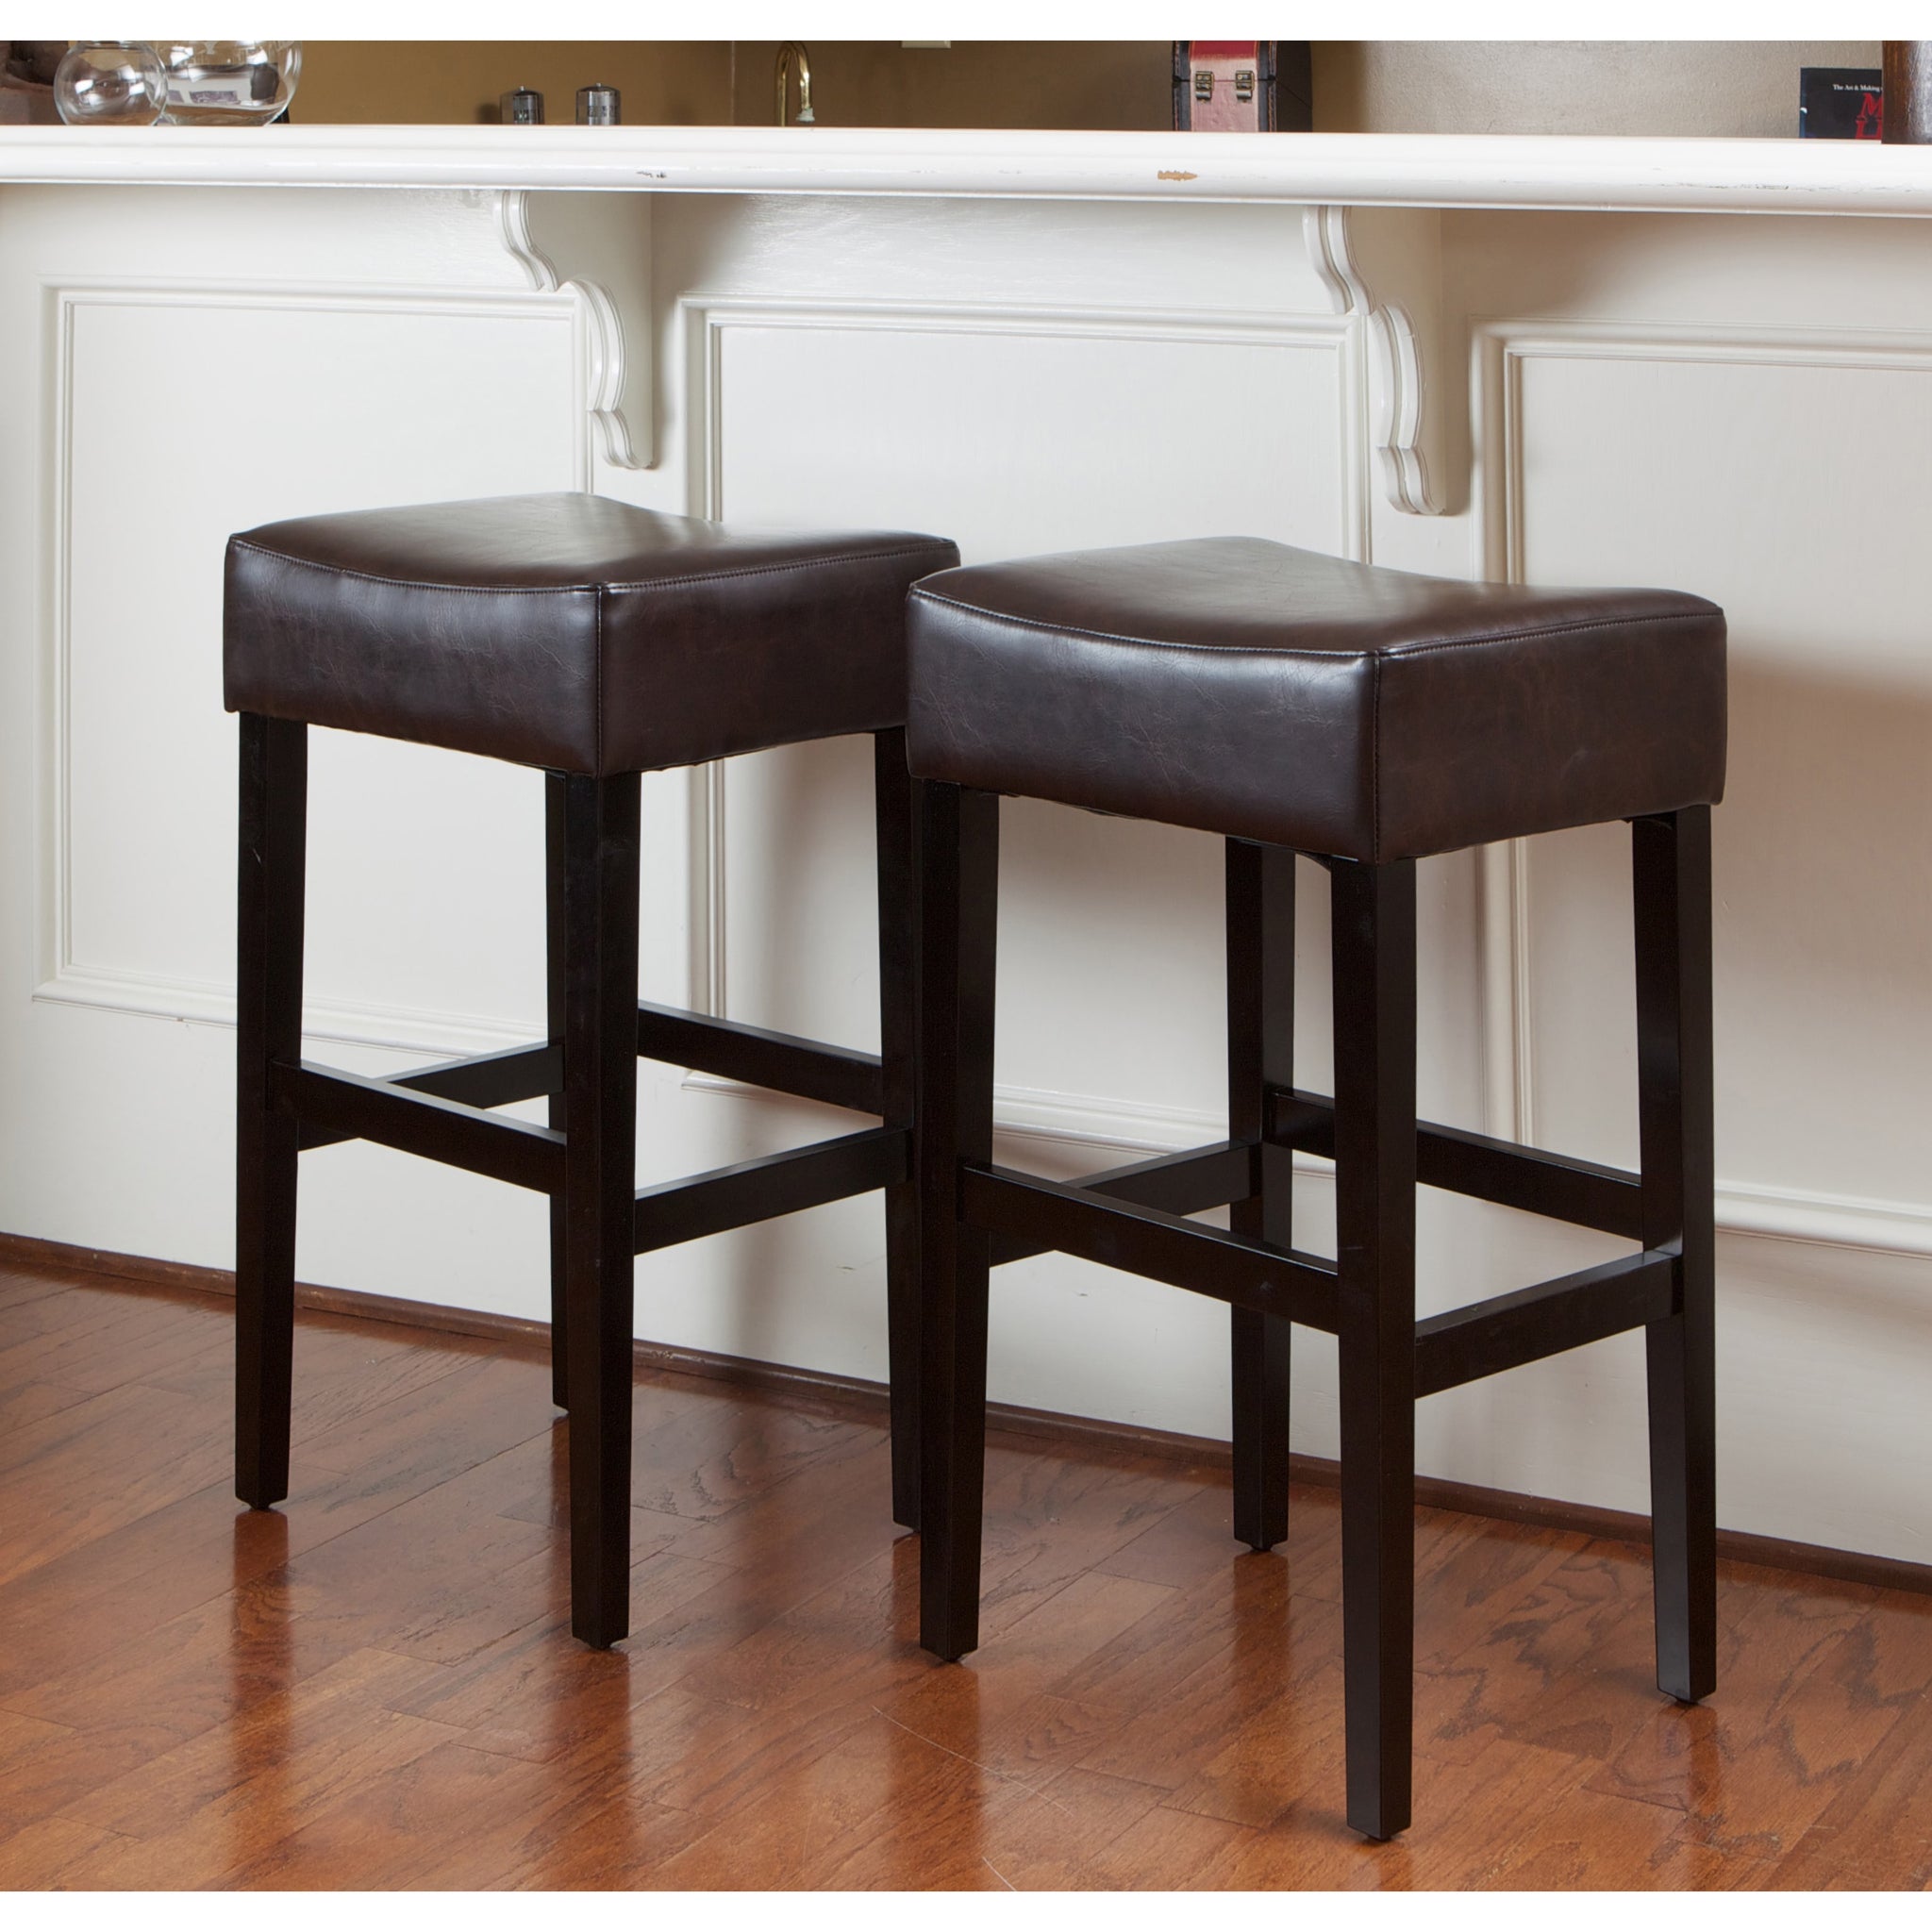 Christopher Knight Home Lopez Brown Leather Backless Bar Stools Set Of 2 7681174d 97d7 447d 9523 E74b3b730ebd 2048x2048 ?v=1532892679